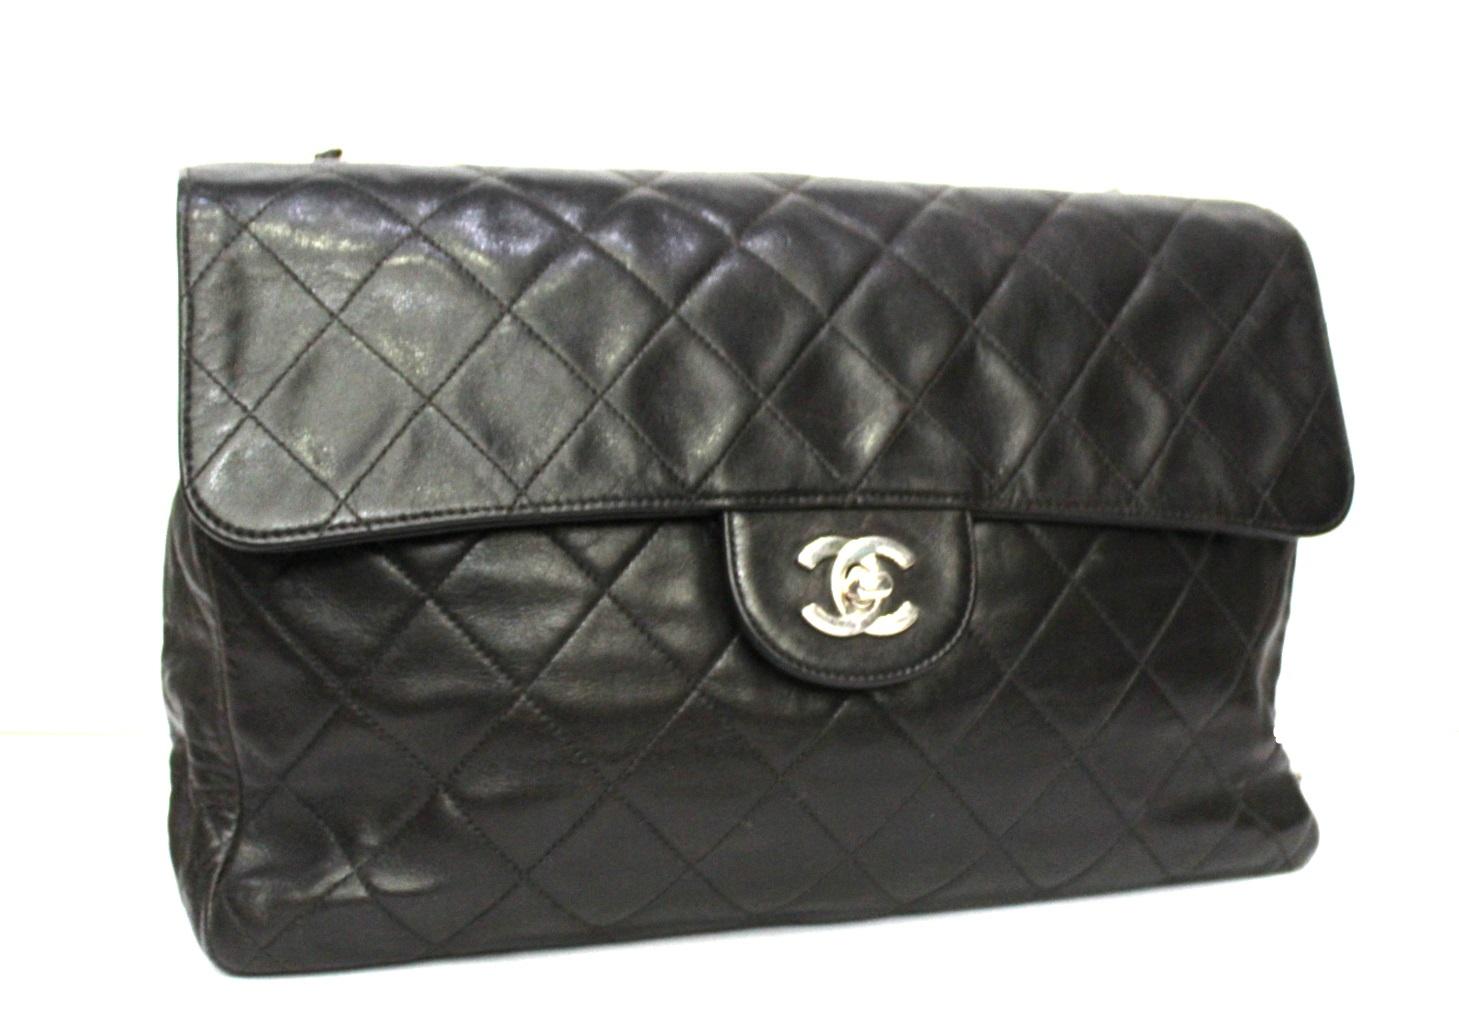 Chanel model Jumbo bag made of soft lambskin with silver hardware.
Classic closure with CC logo, shoulder strap in leather and chain. Internally quite large.
To be a vintage product it is in good condition. Year 1996/1997.